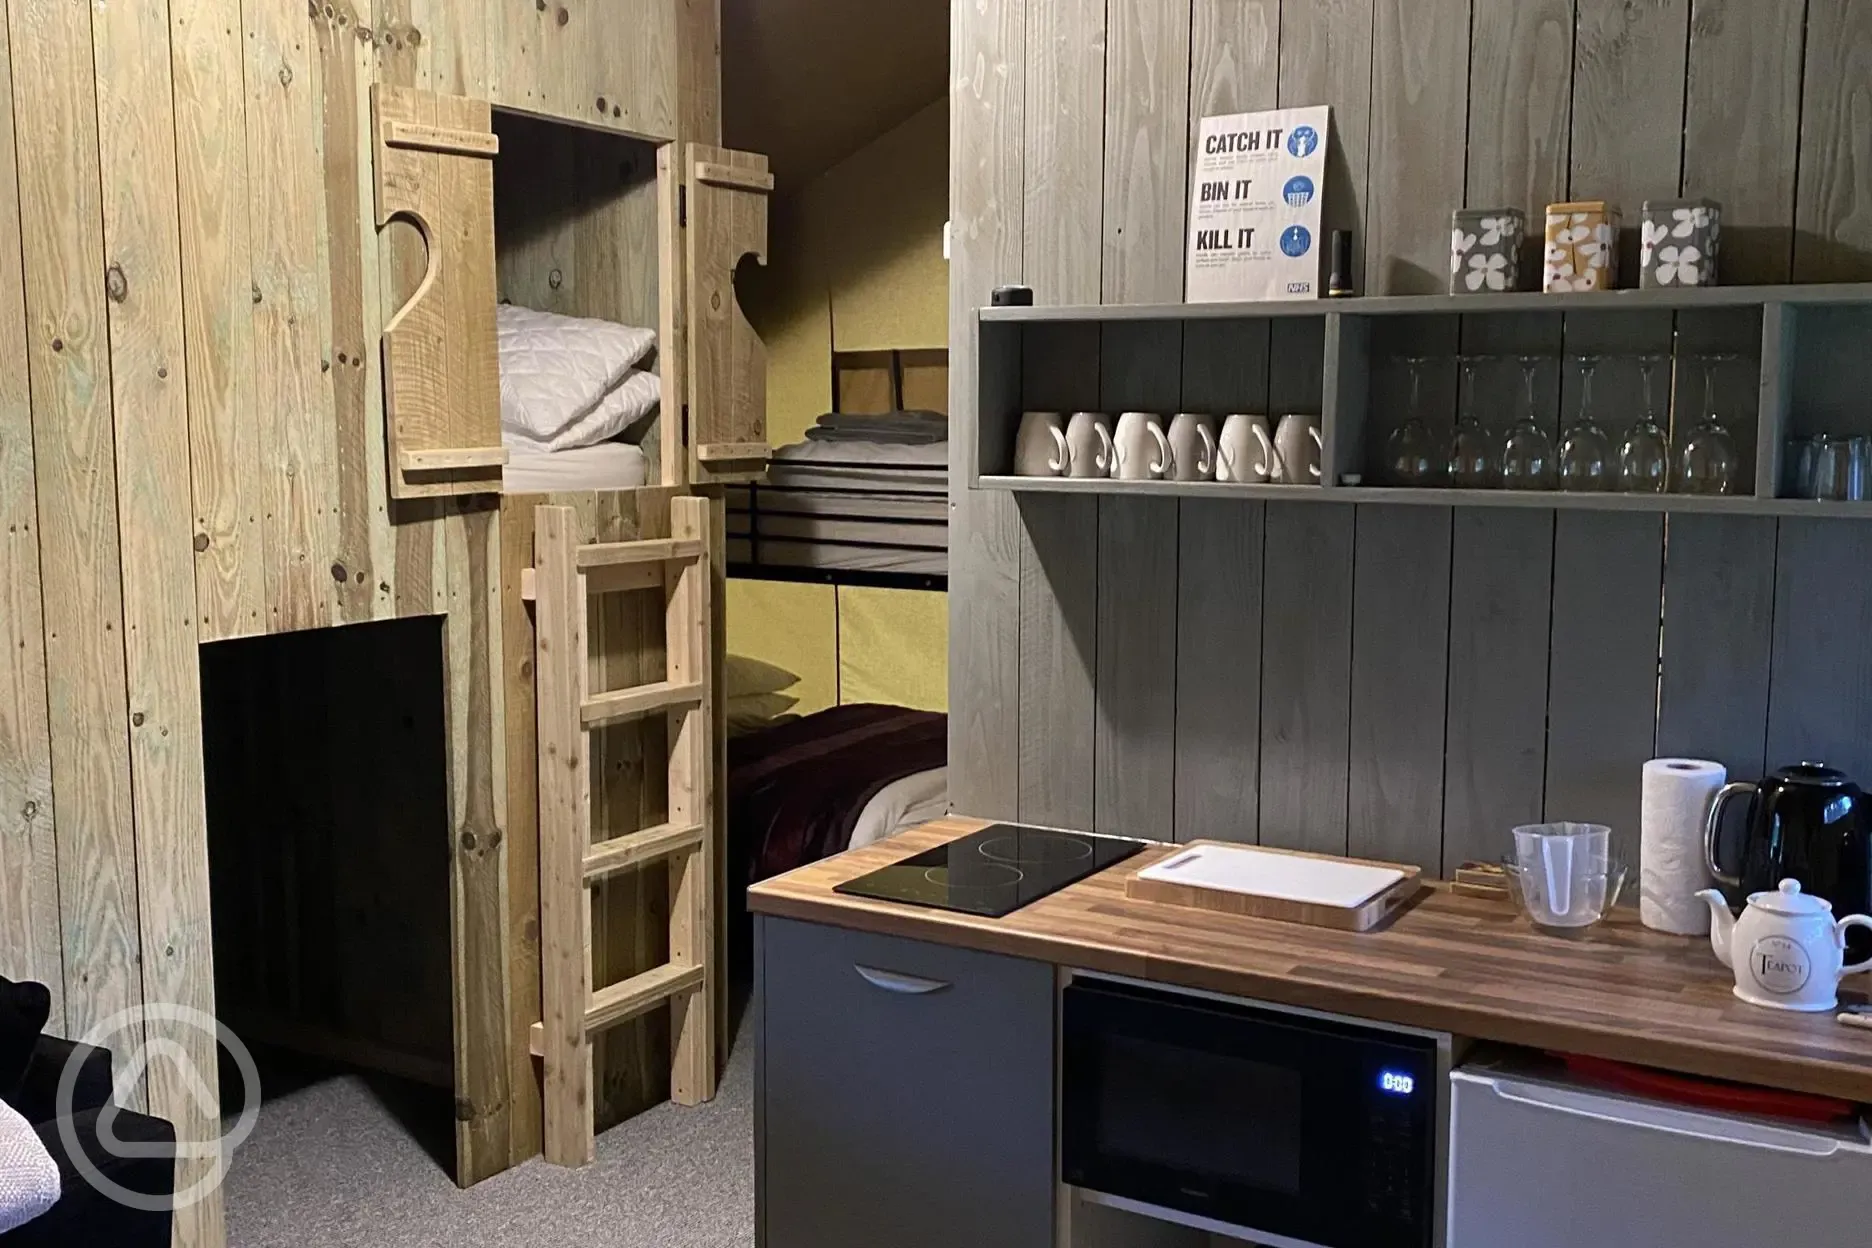 Cabin bed and kitchenette